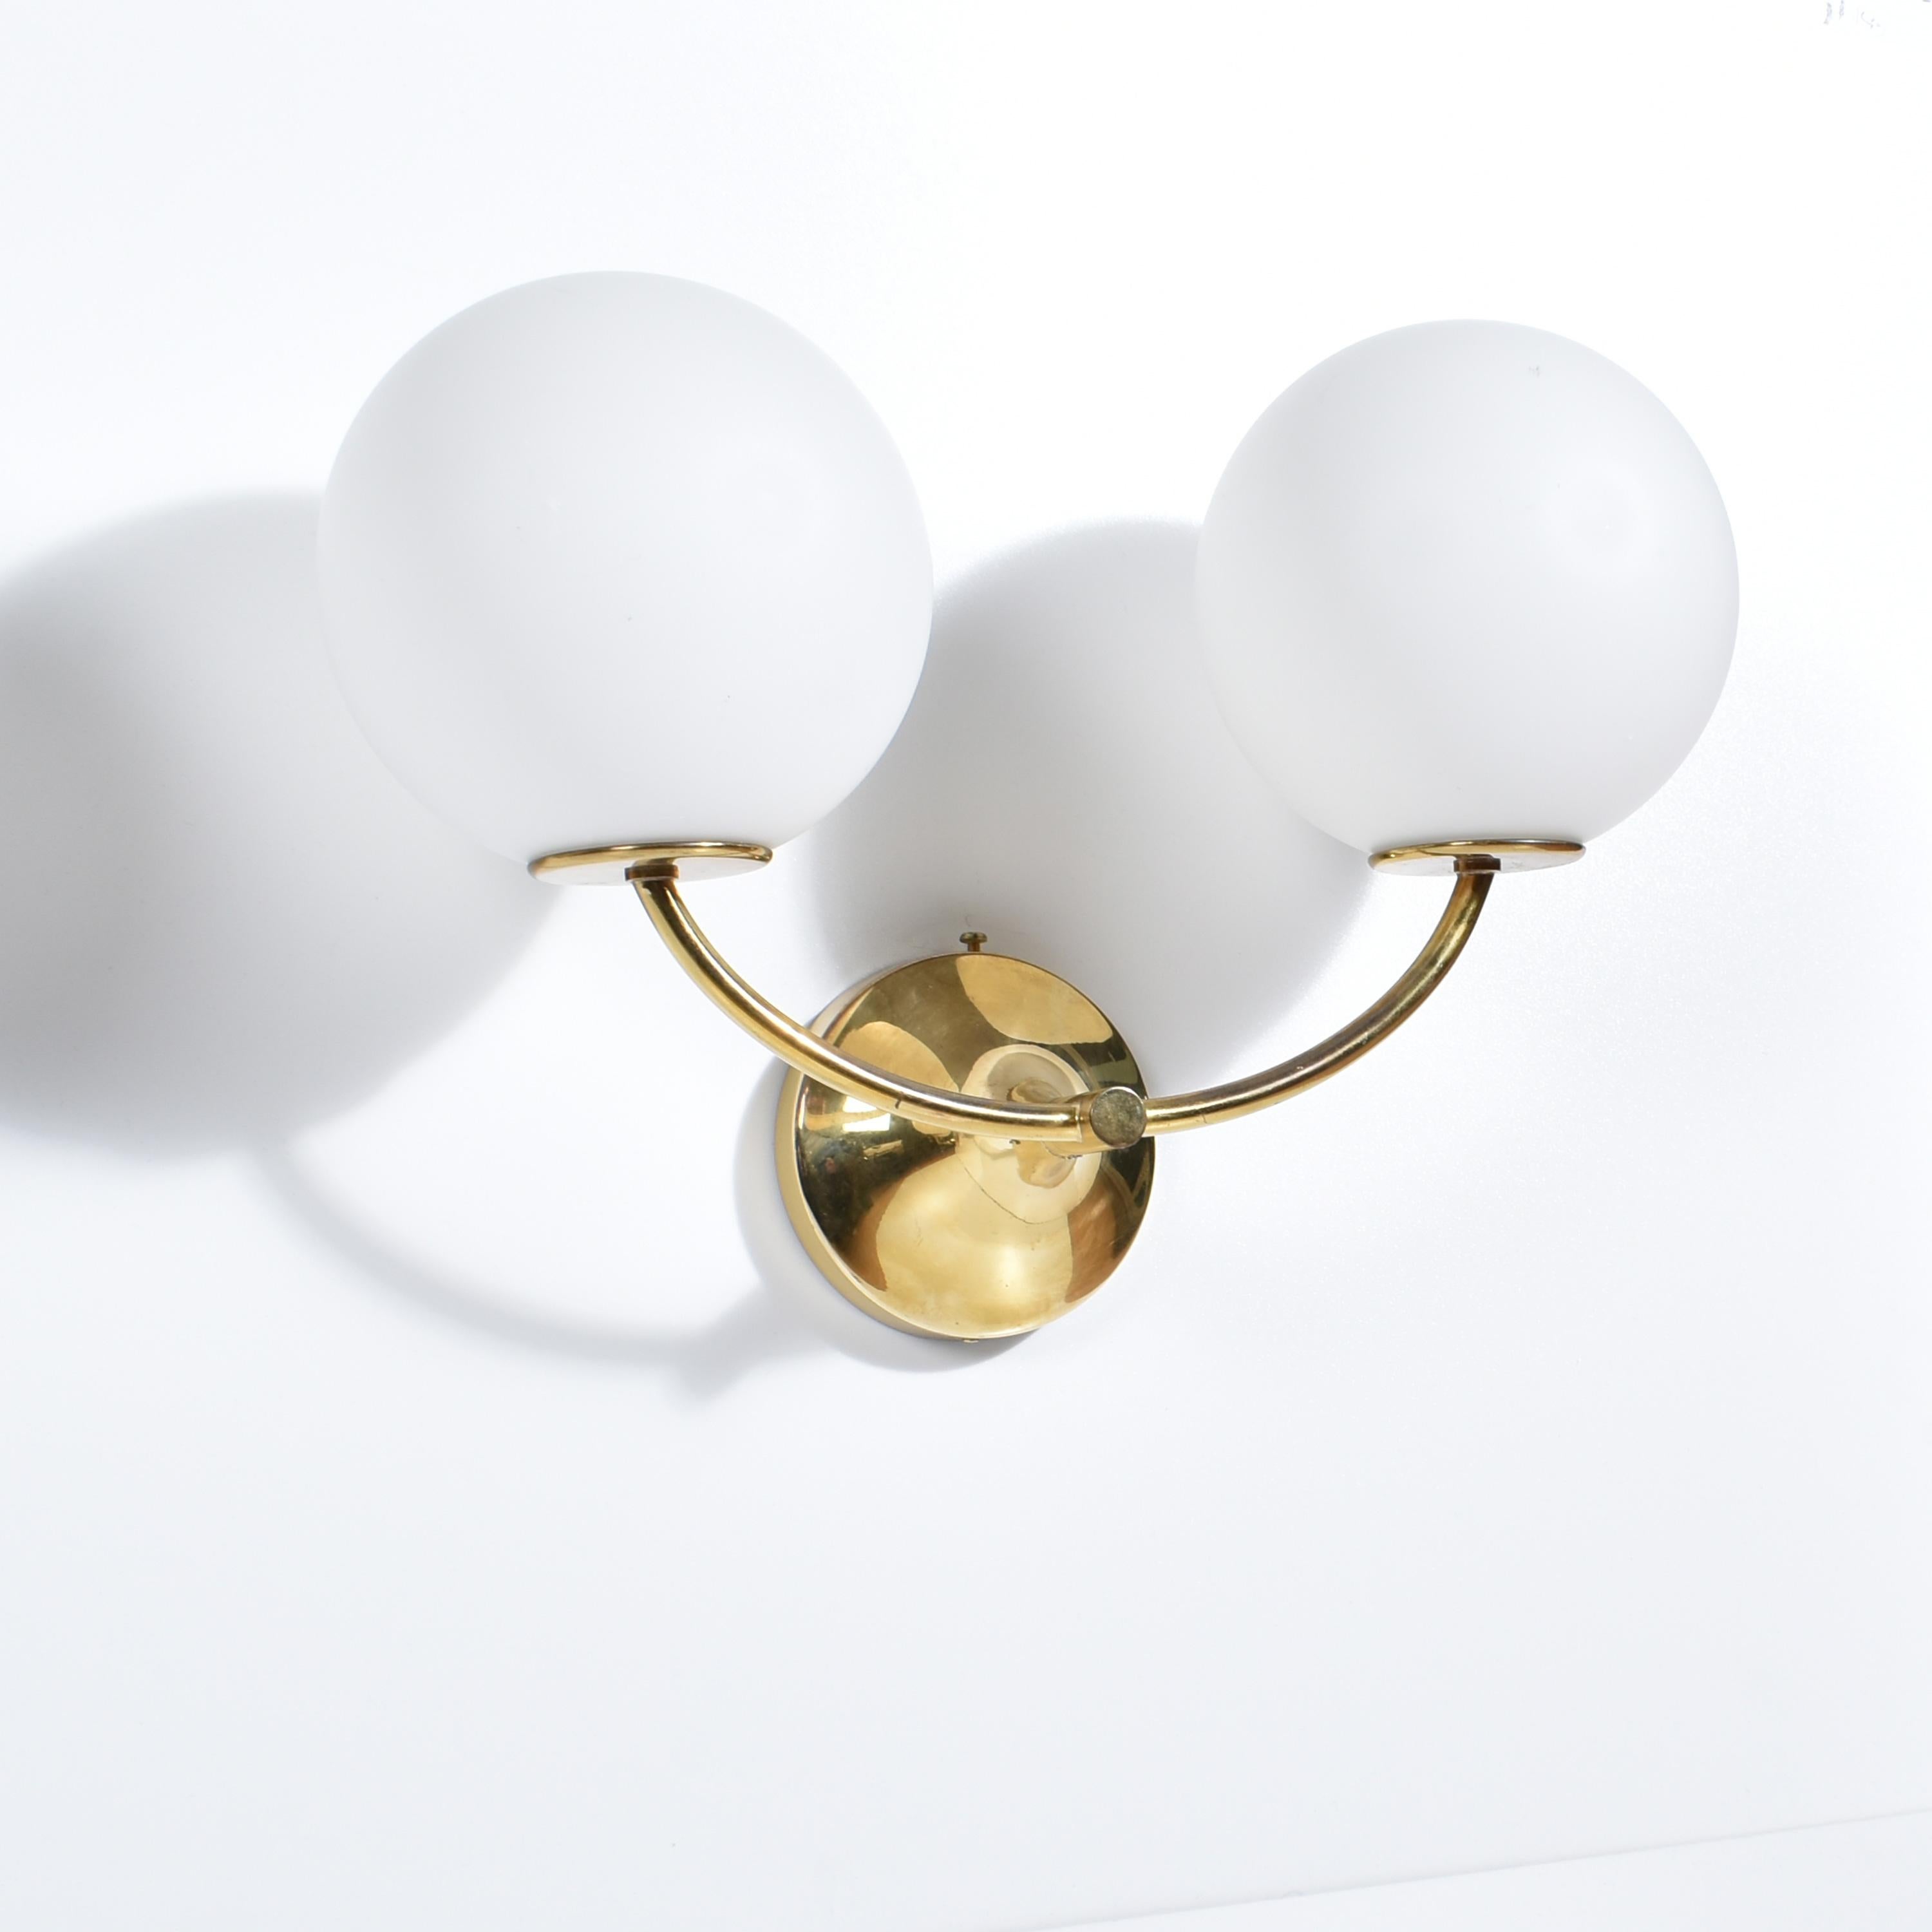 Mid-Century Modern Brass Wall lights With Globes, Max Bill / E.R. Nele for Temde, Set of Four, 1960